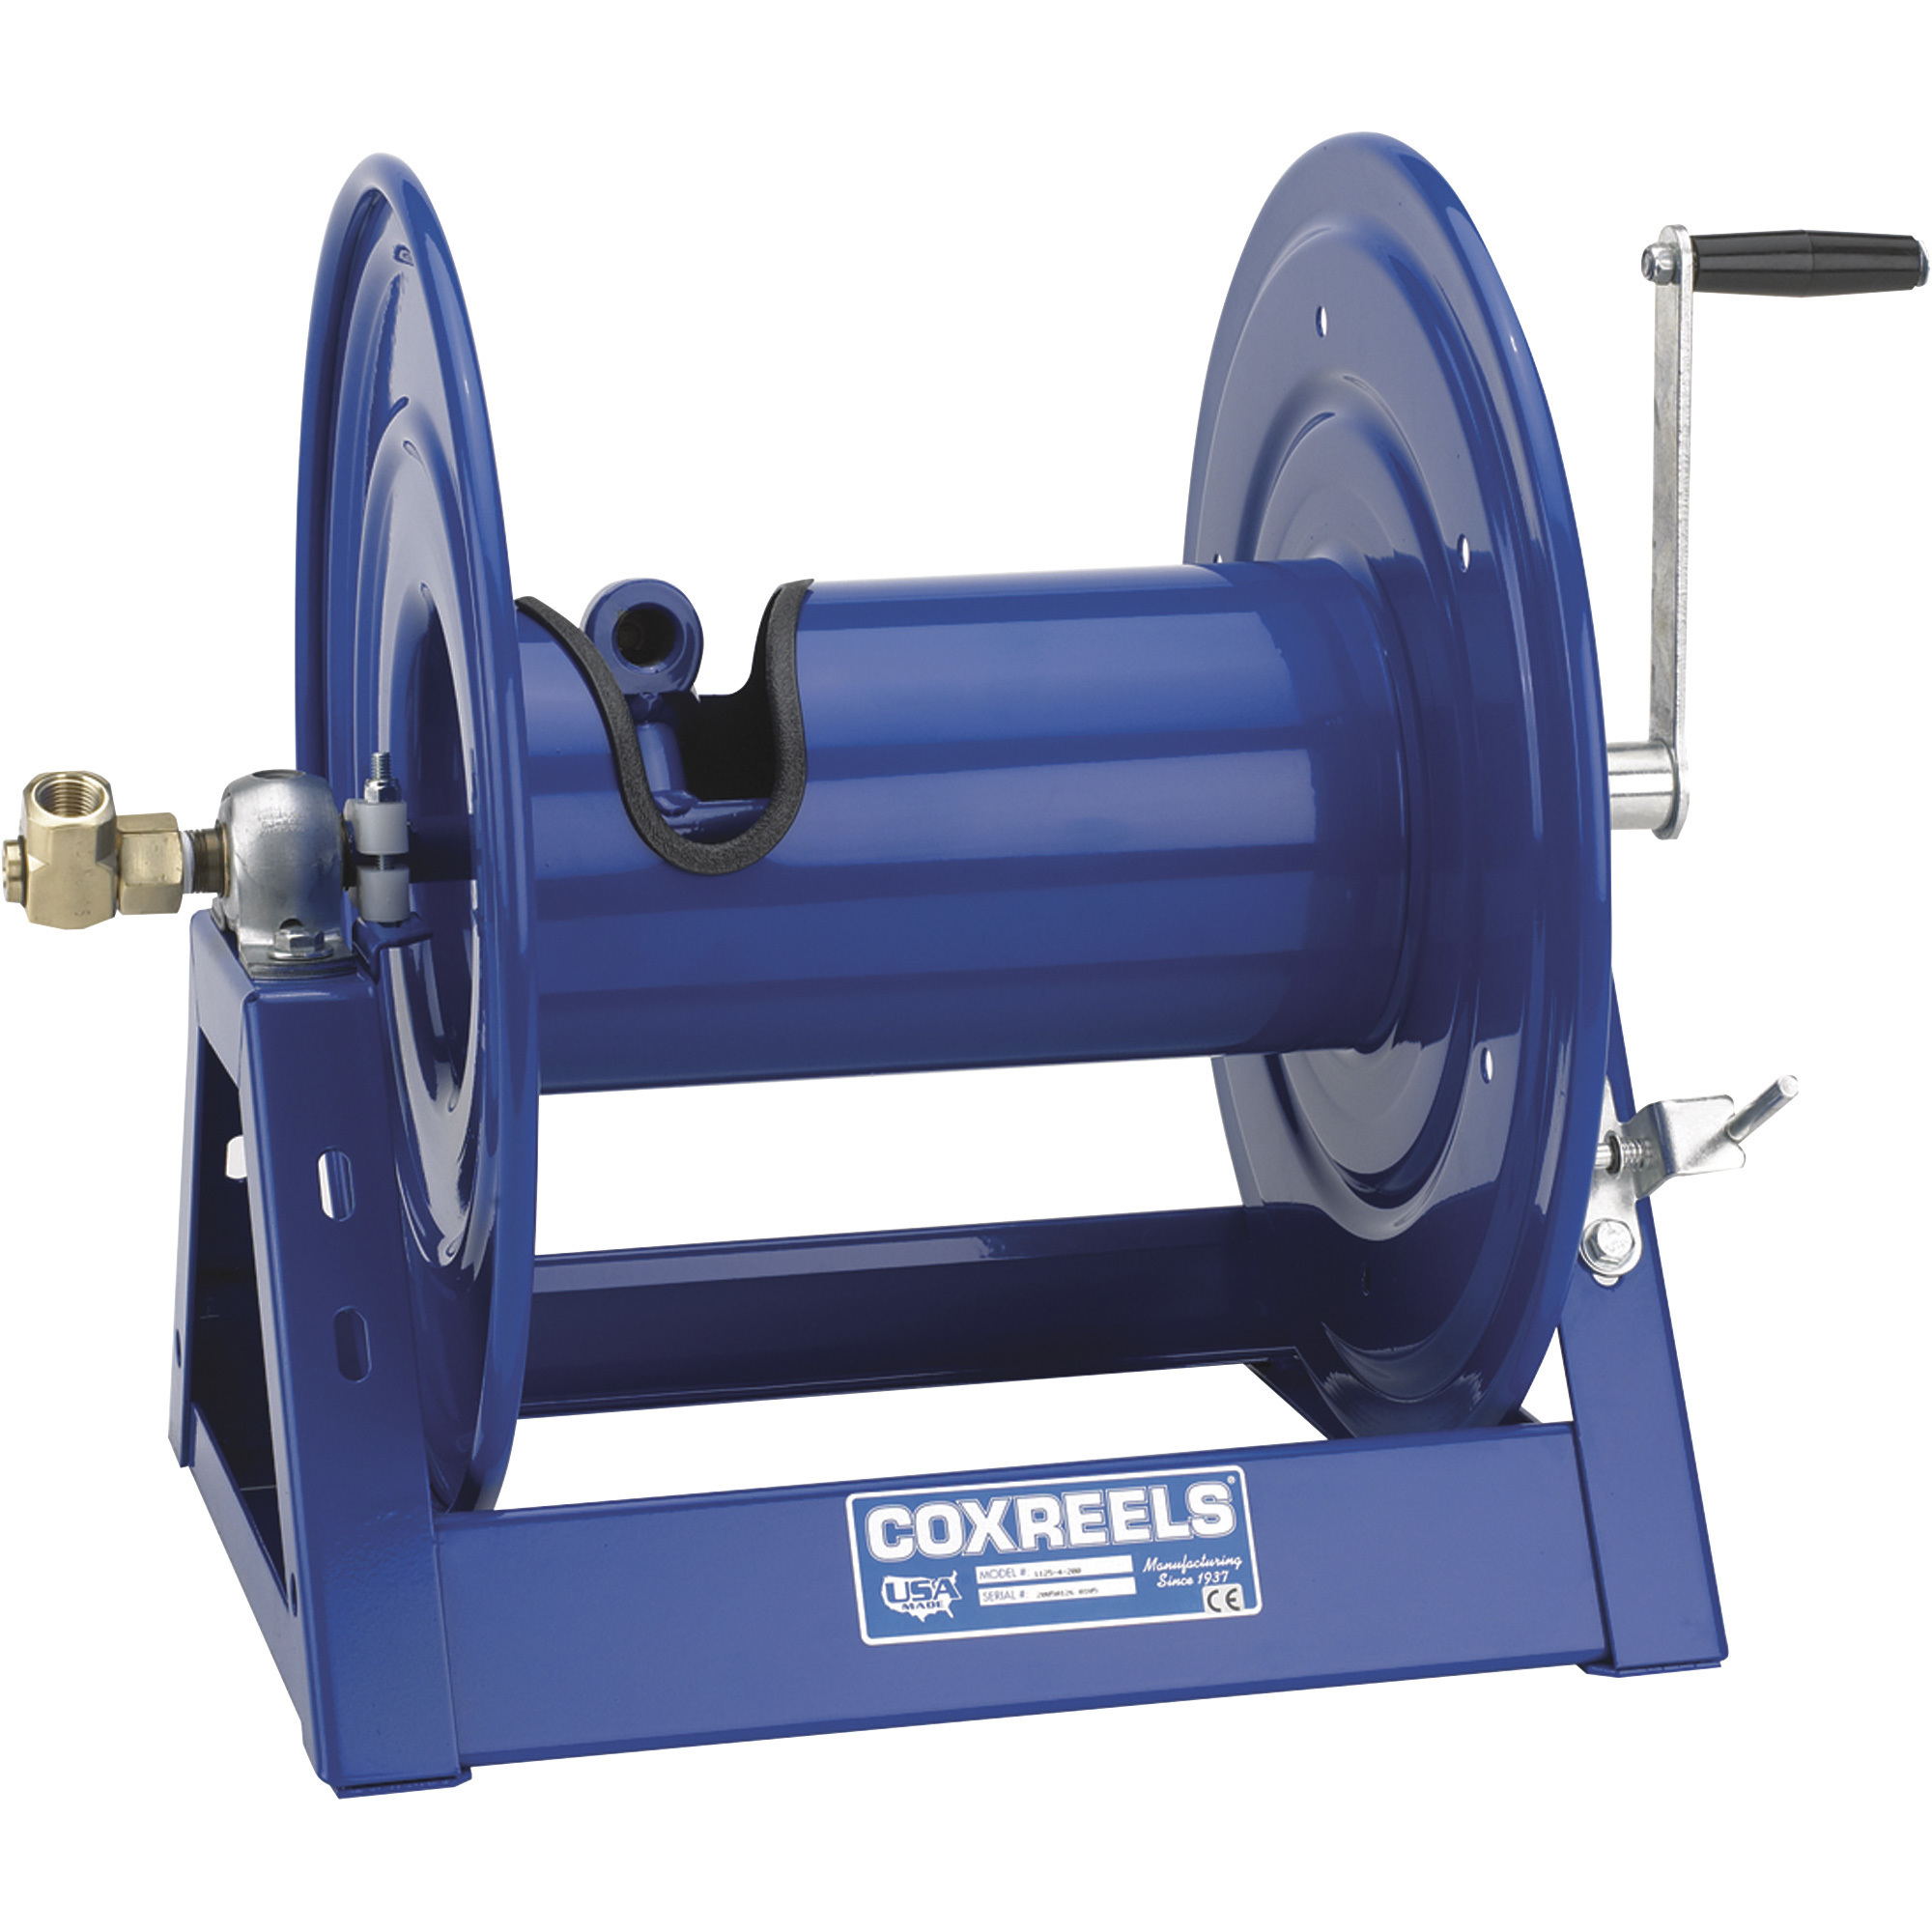 Coxreels Hand-Crank Hose Reel - Holds 3/8Inch x 300ft. Hose, Max. 3000 PSI, Model 1125-4-200-BEXX